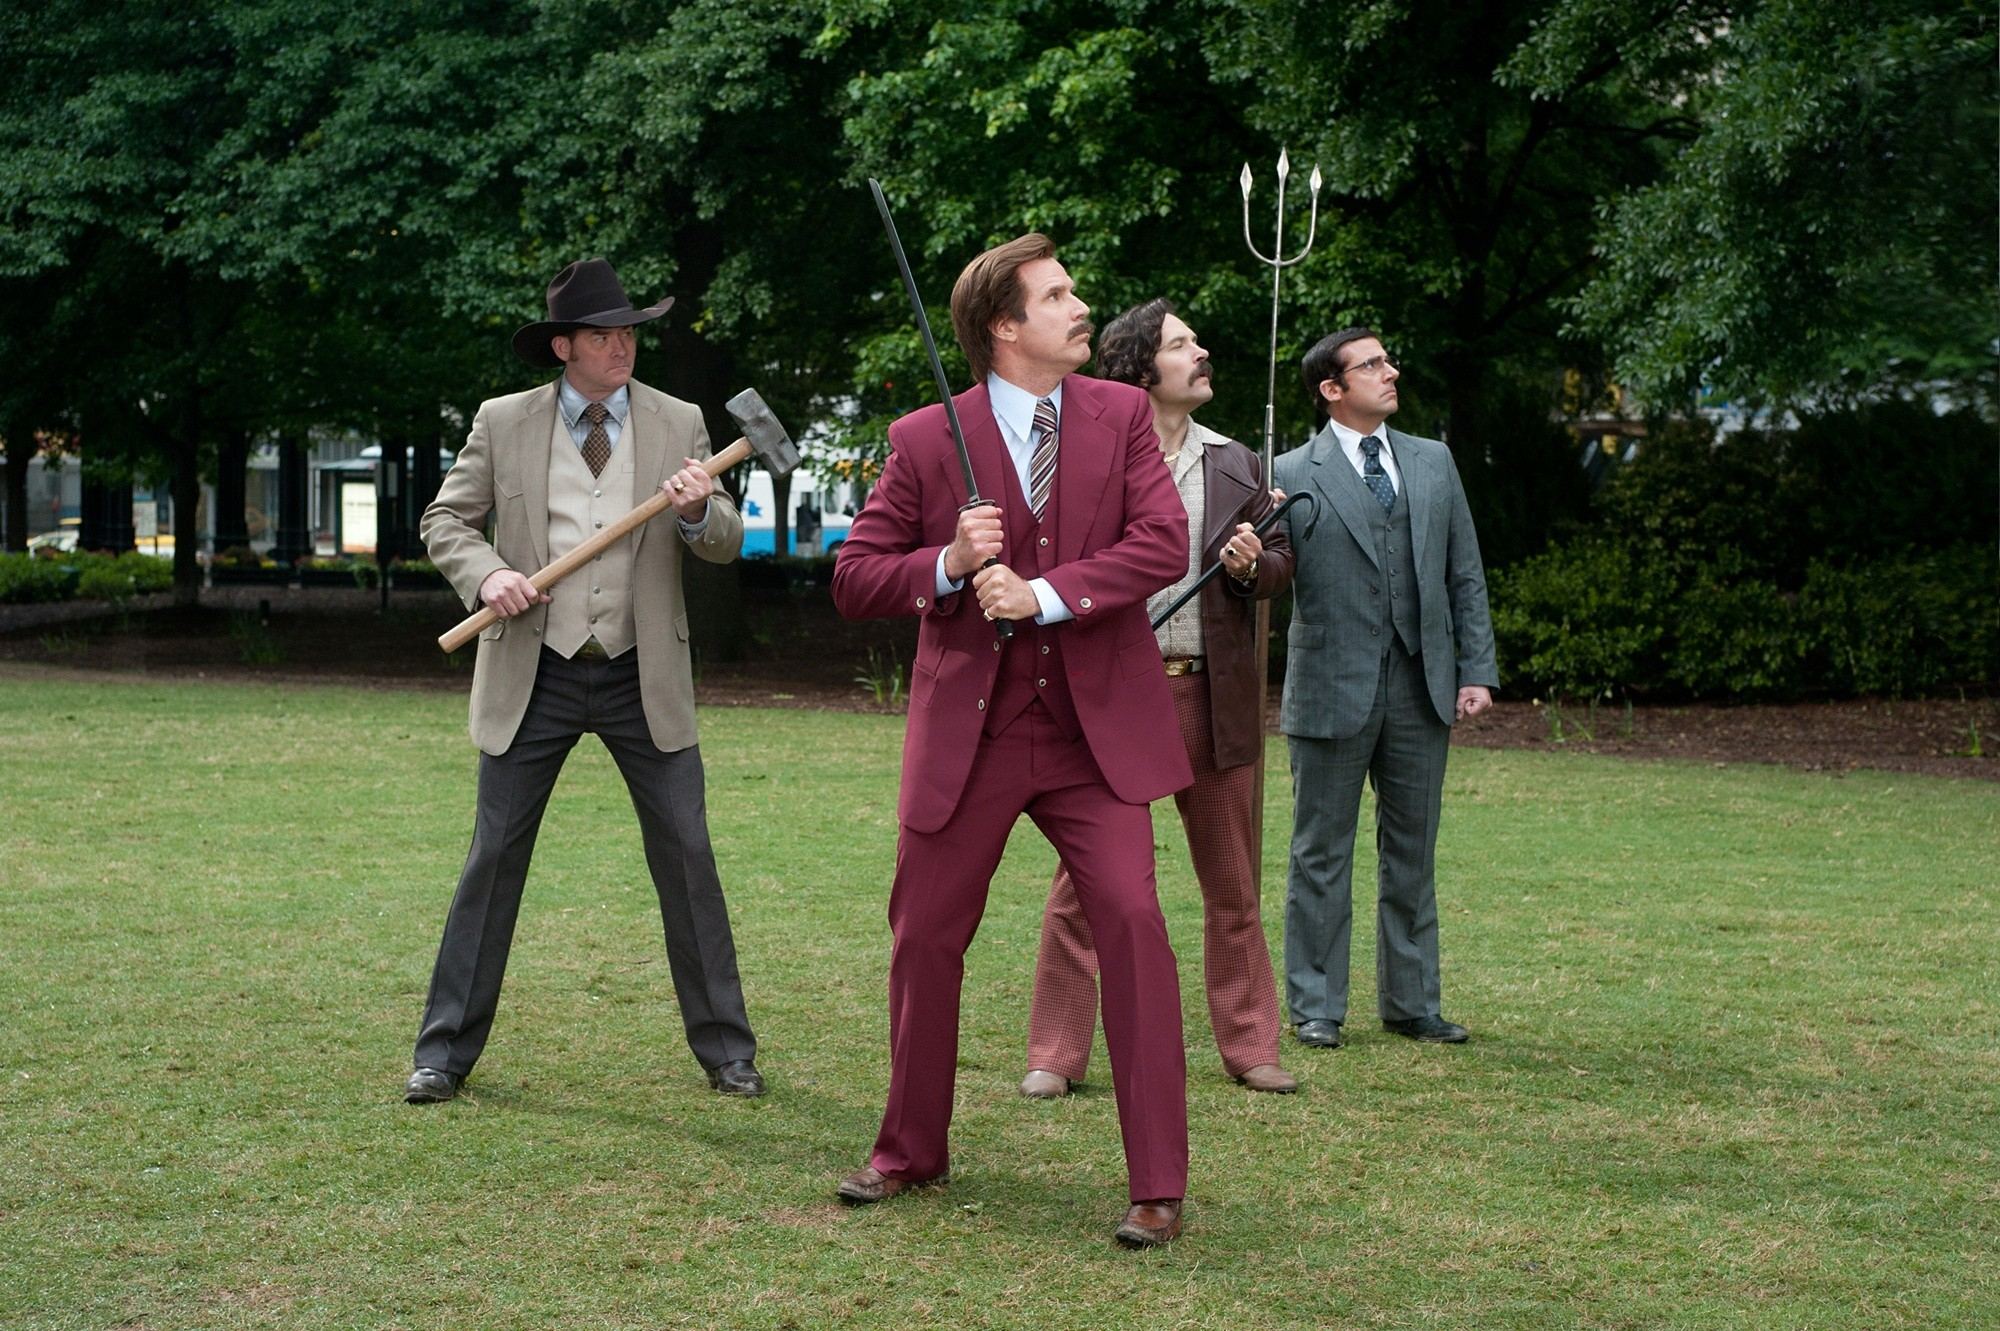 David Koechner, Will Ferrell, Paul Rudd and Steve Carell in Paramount Pictures' Anchorman: The Legend Continues (2013)